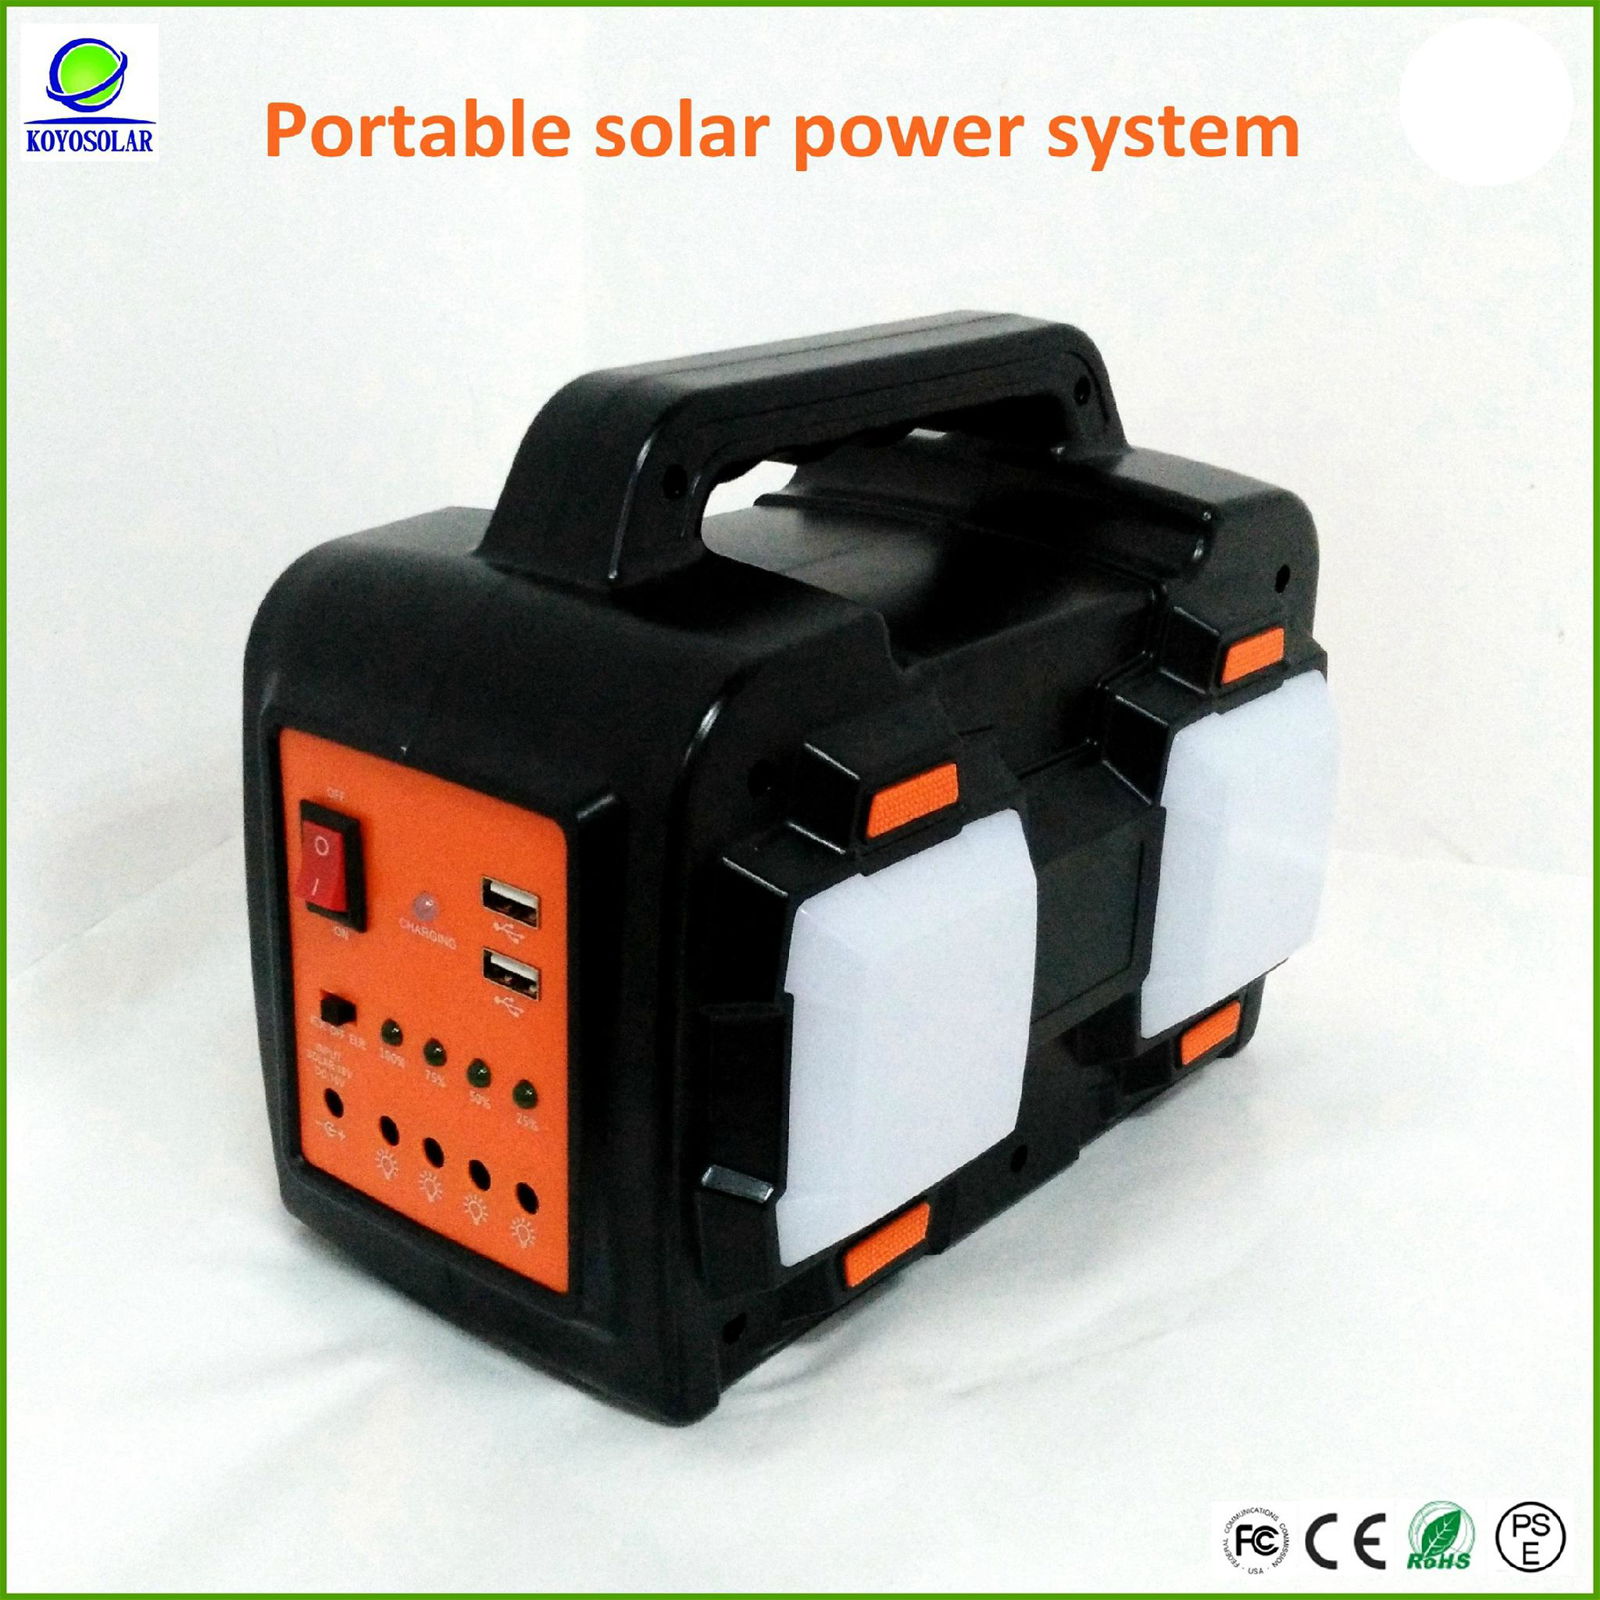 high quality portable solar power system with battery capacity indicator 4